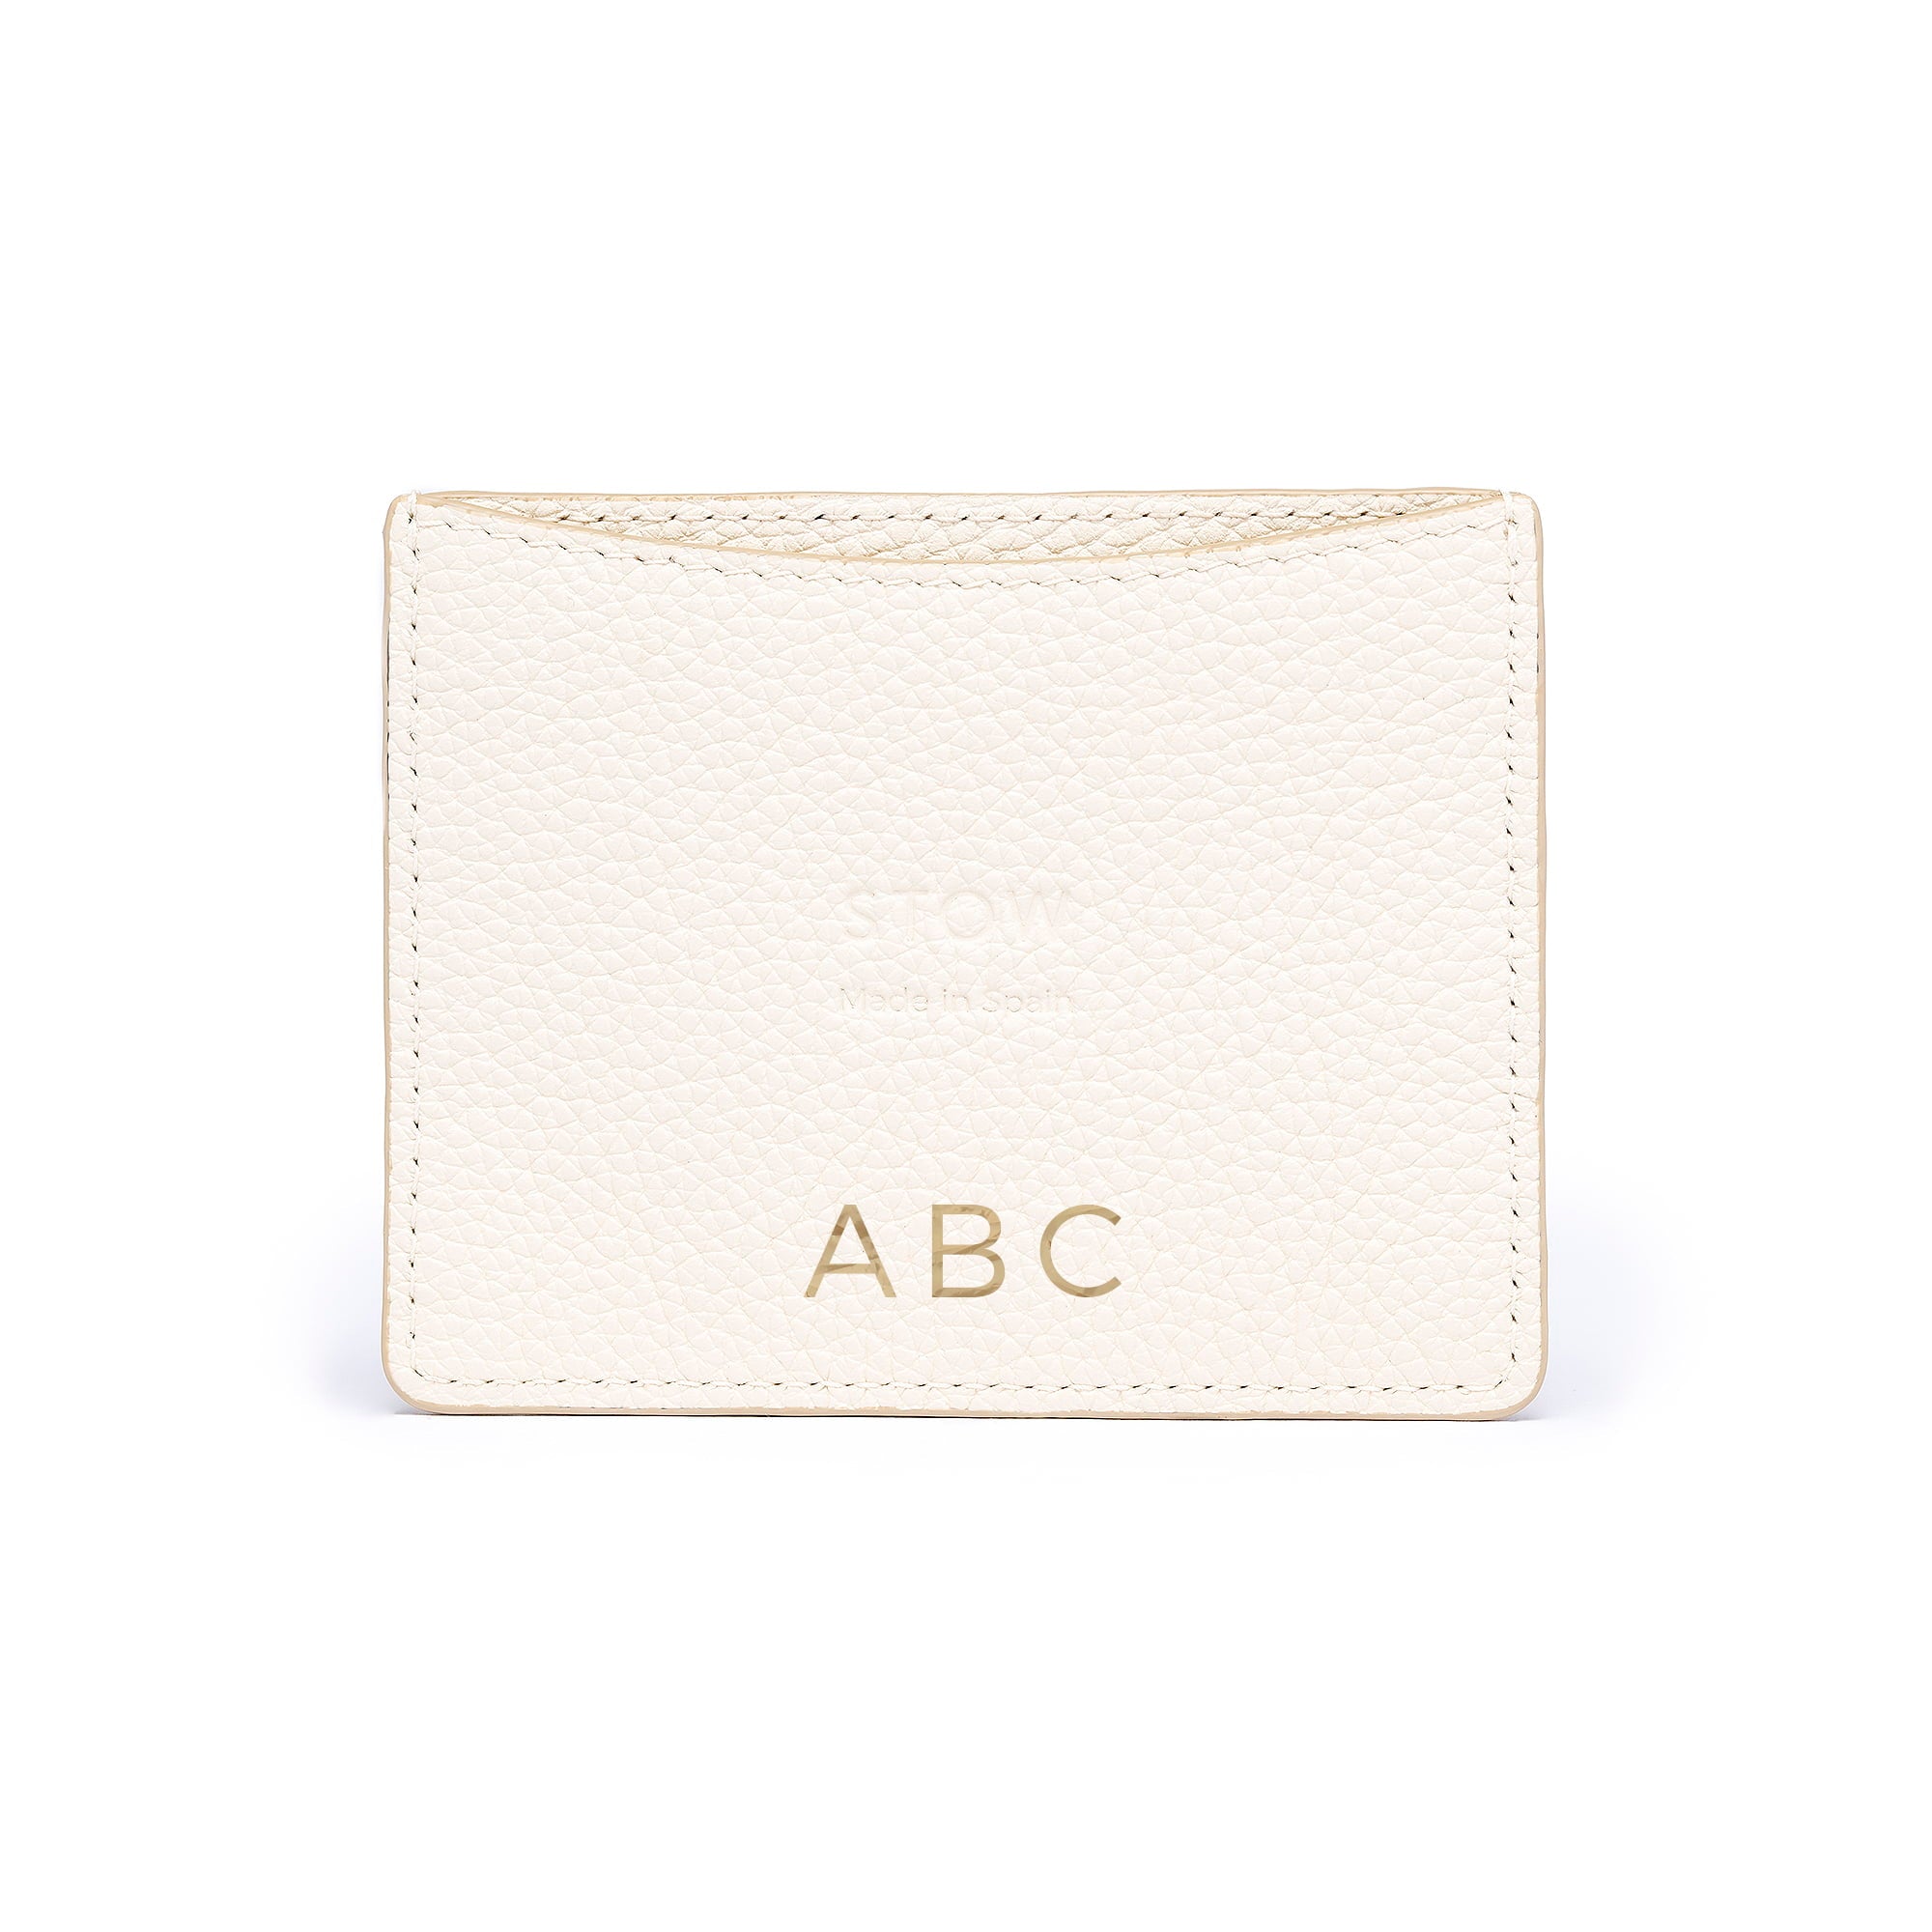 STOW Leather Cardholder in Spring Moon colour with personalised initials.